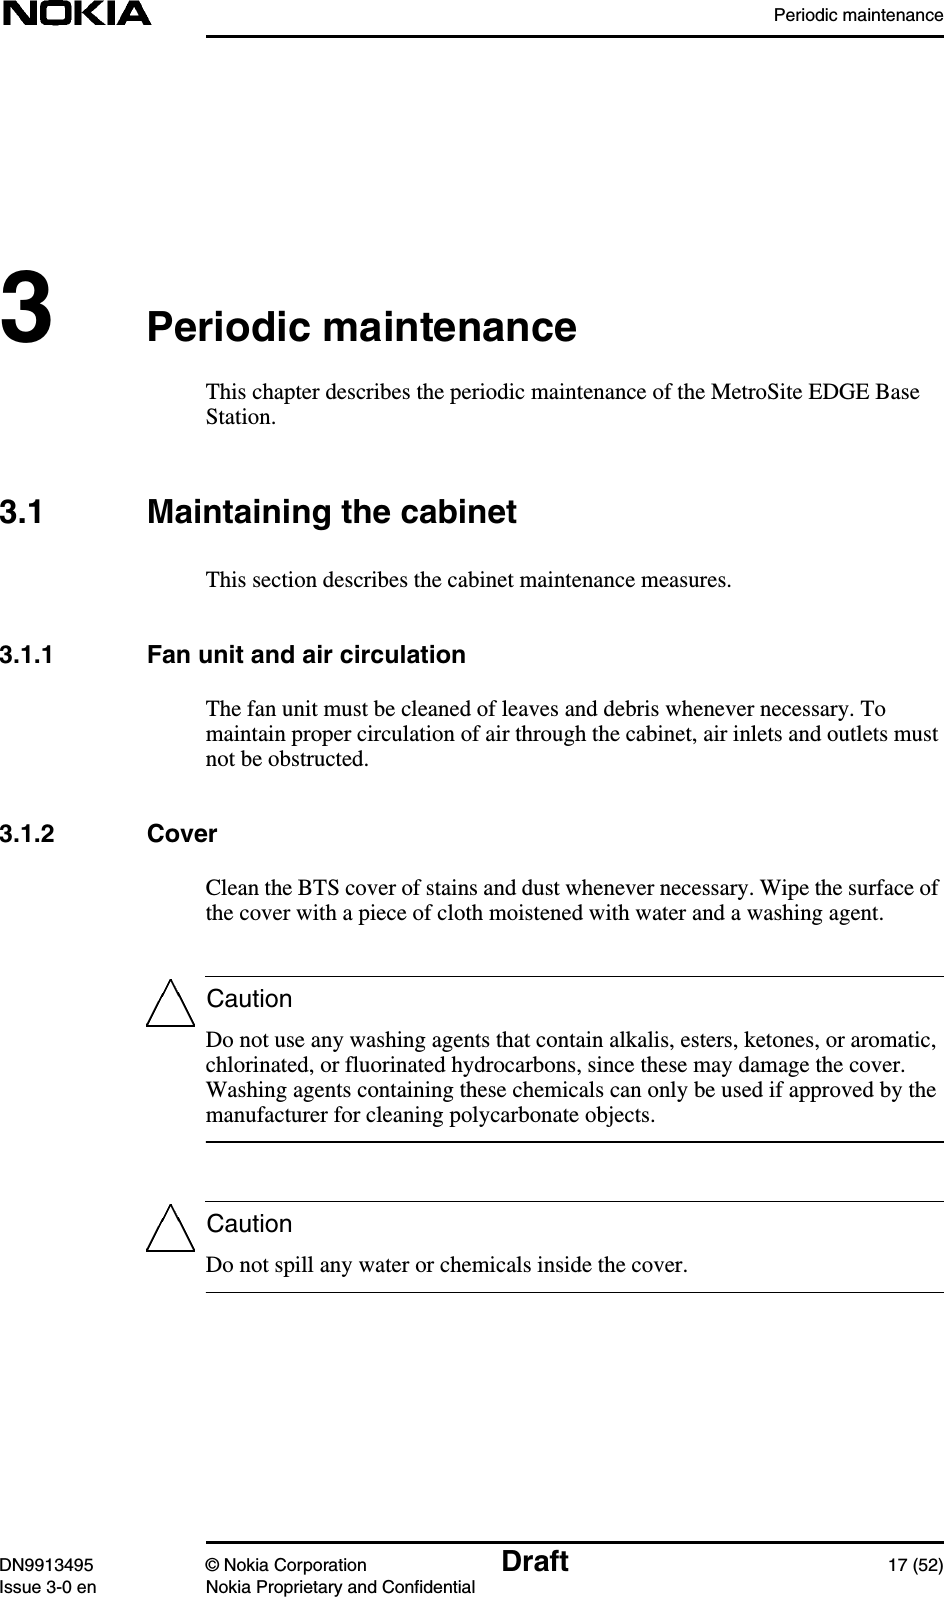 Periodic maintenanceDN9913495 © Nokia Corporation Draft 17 (52)Issue 3-0 en Nokia Proprietary and ConfidentialCautionCaution3Periodic maintenanceThis chapter describes the periodic maintenance of the MetroSite EDGE BaseStation.3.1 Maintaining the cabinetThis section describes the cabinet maintenance measures.3.1.1 Fan unit and air circulationThe fan unit must be cleaned of leaves and debris whenever necessary. Tomaintain proper circulation of air through the cabinet, air inlets and outlets mustnot be obstructed.3.1.2 CoverClean the BTS cover of stains and dust whenever necessary. Wipe the surface ofthe cover with a piece of cloth moistened with water and a washing agent.Do not use any washing agents that contain alkalis, esters, ketones, or aromatic,chlorinated, or fluorinated hydrocarbons, since these may damage the cover.Washing agents containing these chemicals can only be used if approved by themanufacturer for cleaning polycarbonate objects.Do not spill any water or chemicals inside the cover.